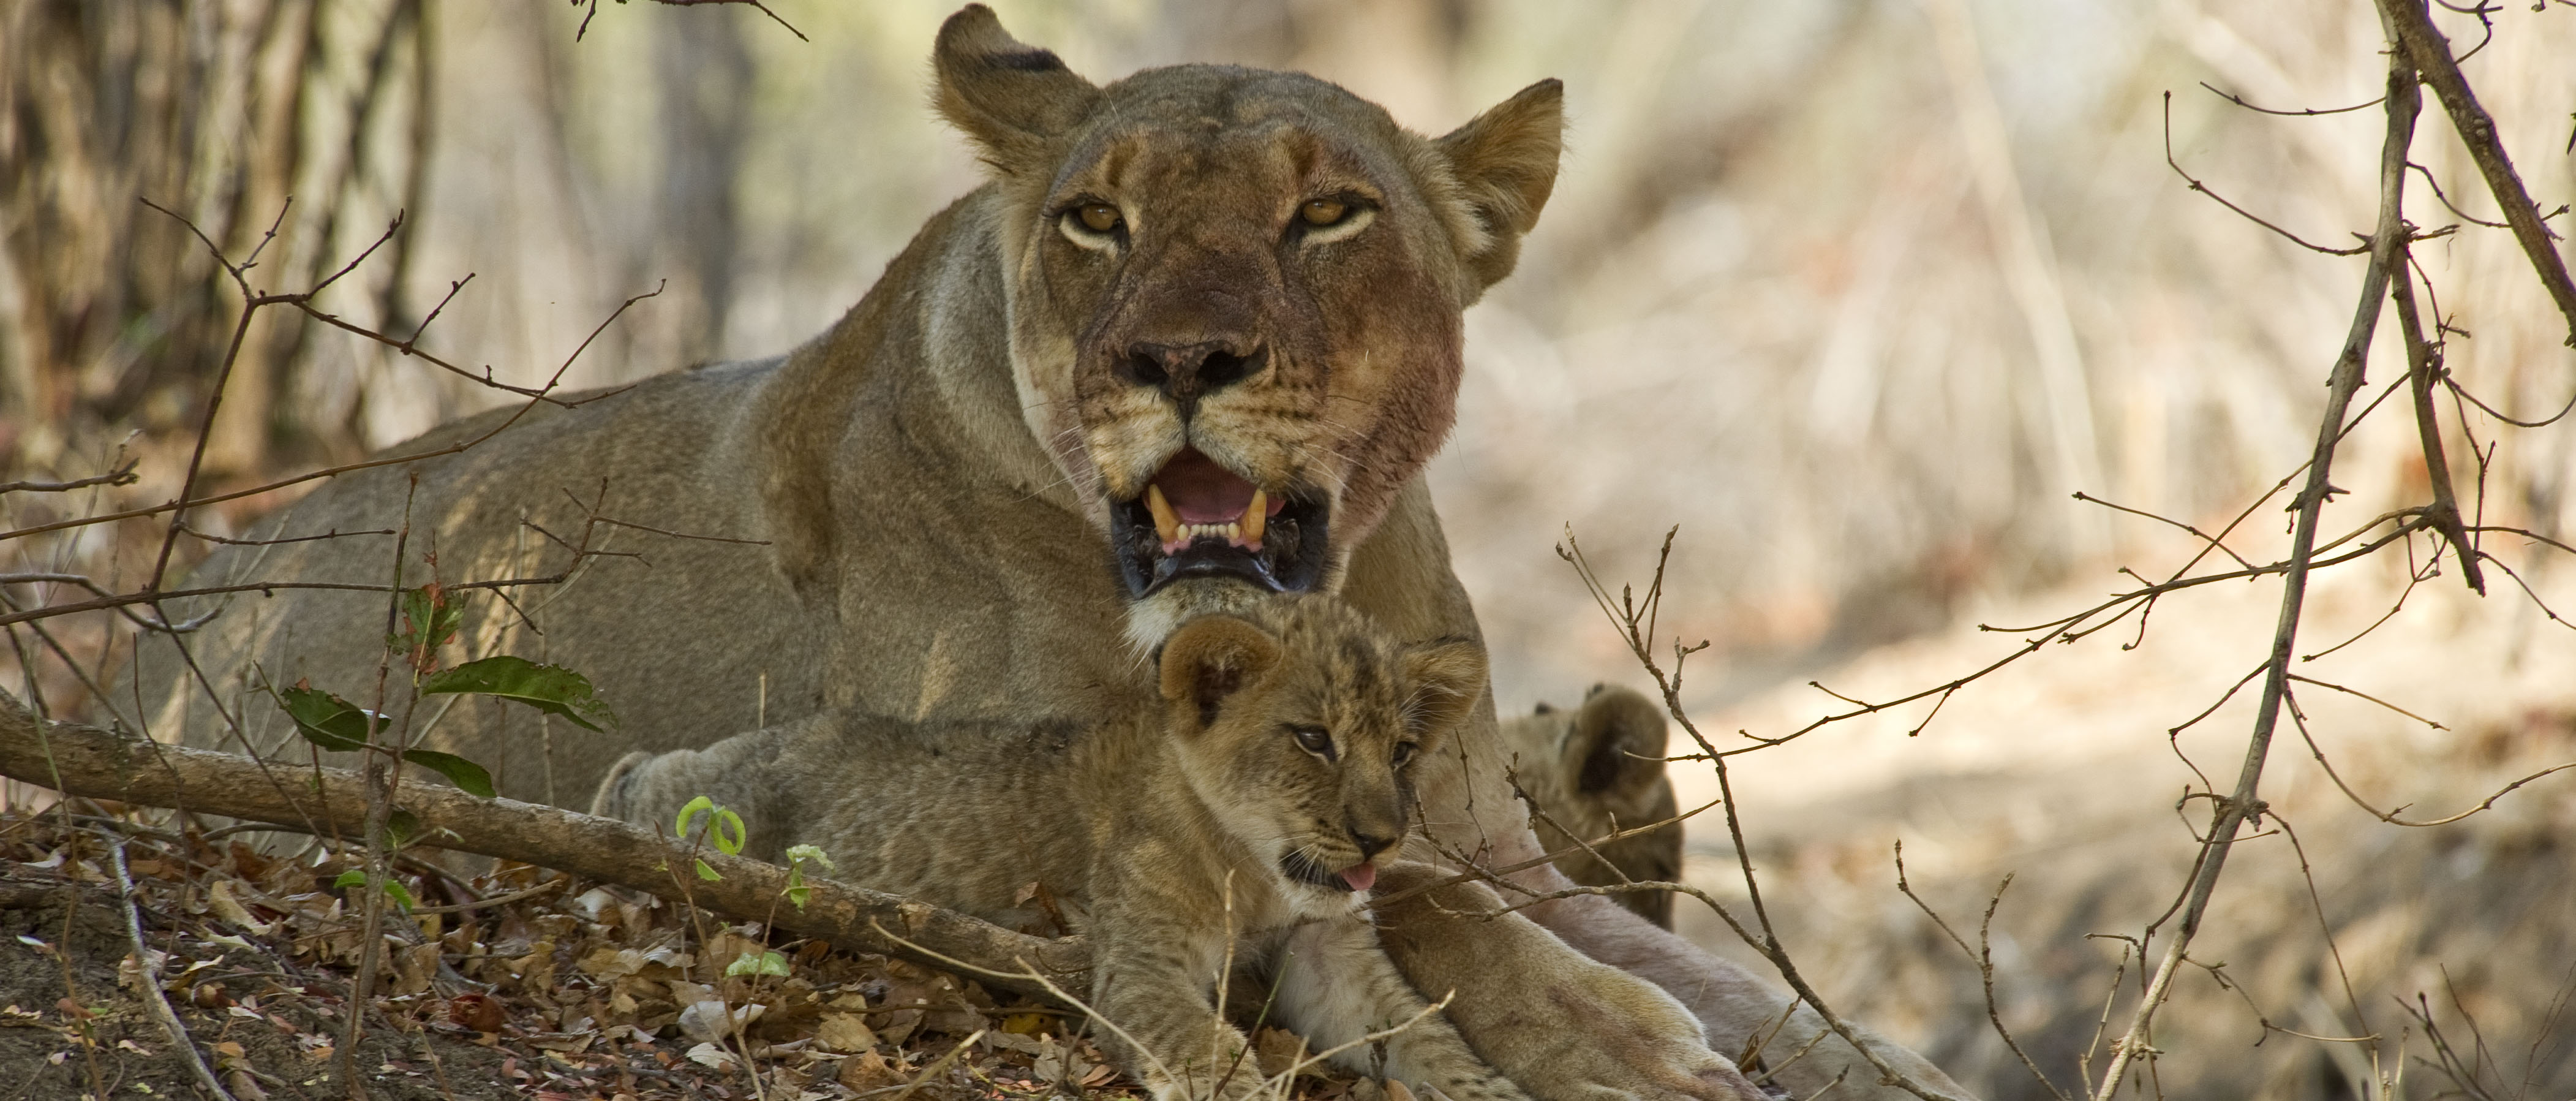 Lioness with cubs. Lion is one of the big five safari animals.